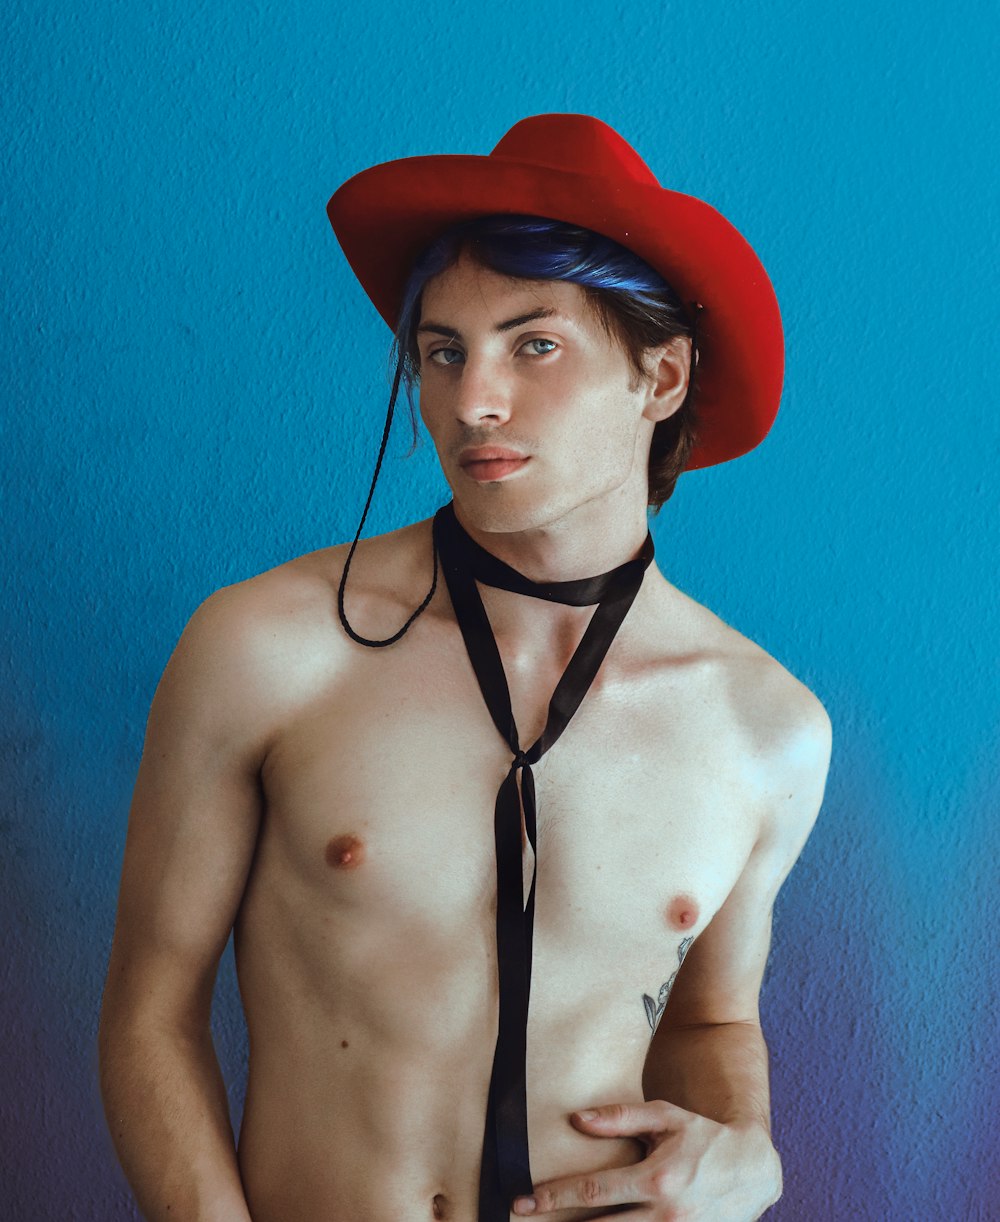 a shirtless man wearing a red hat and tie